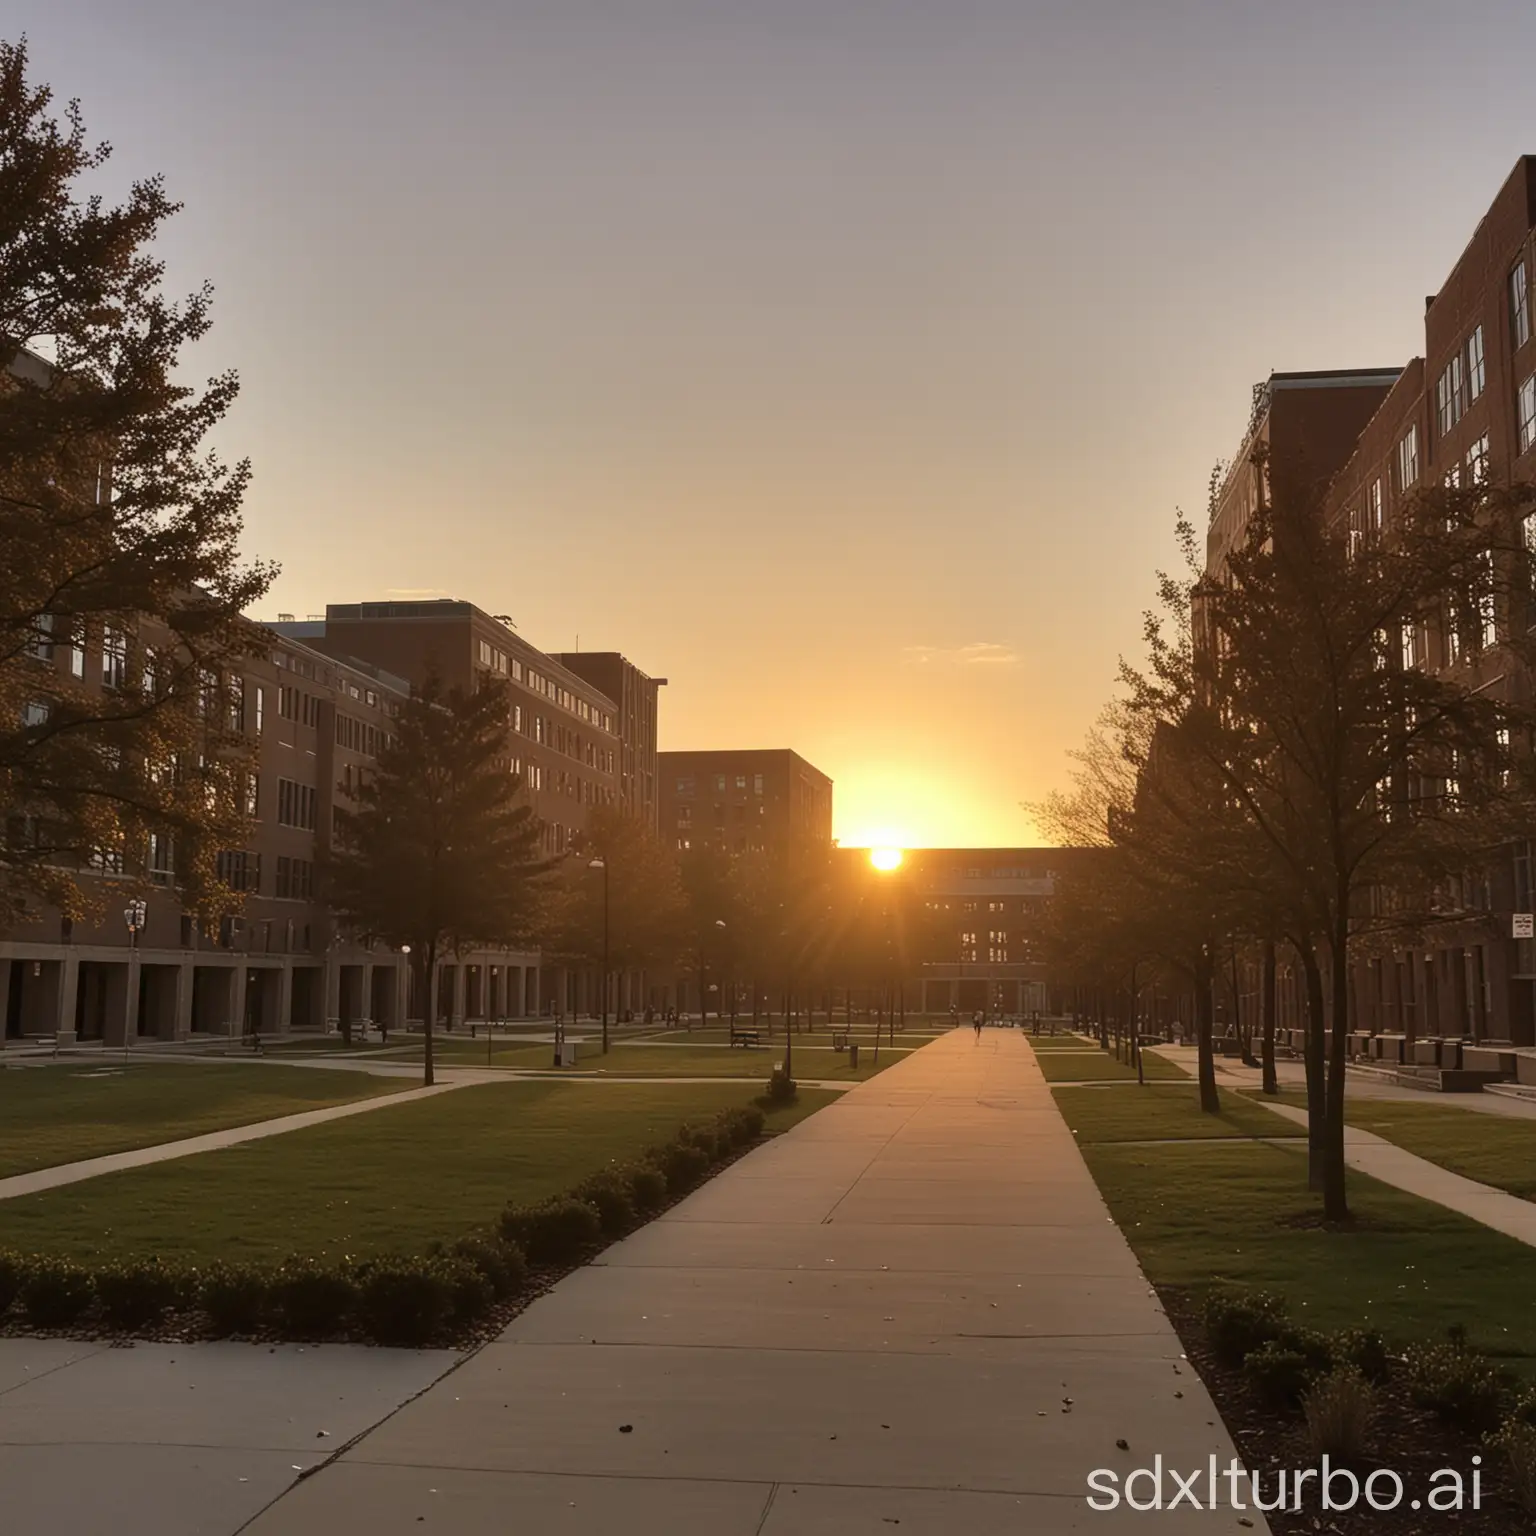 The campus by the setting sun